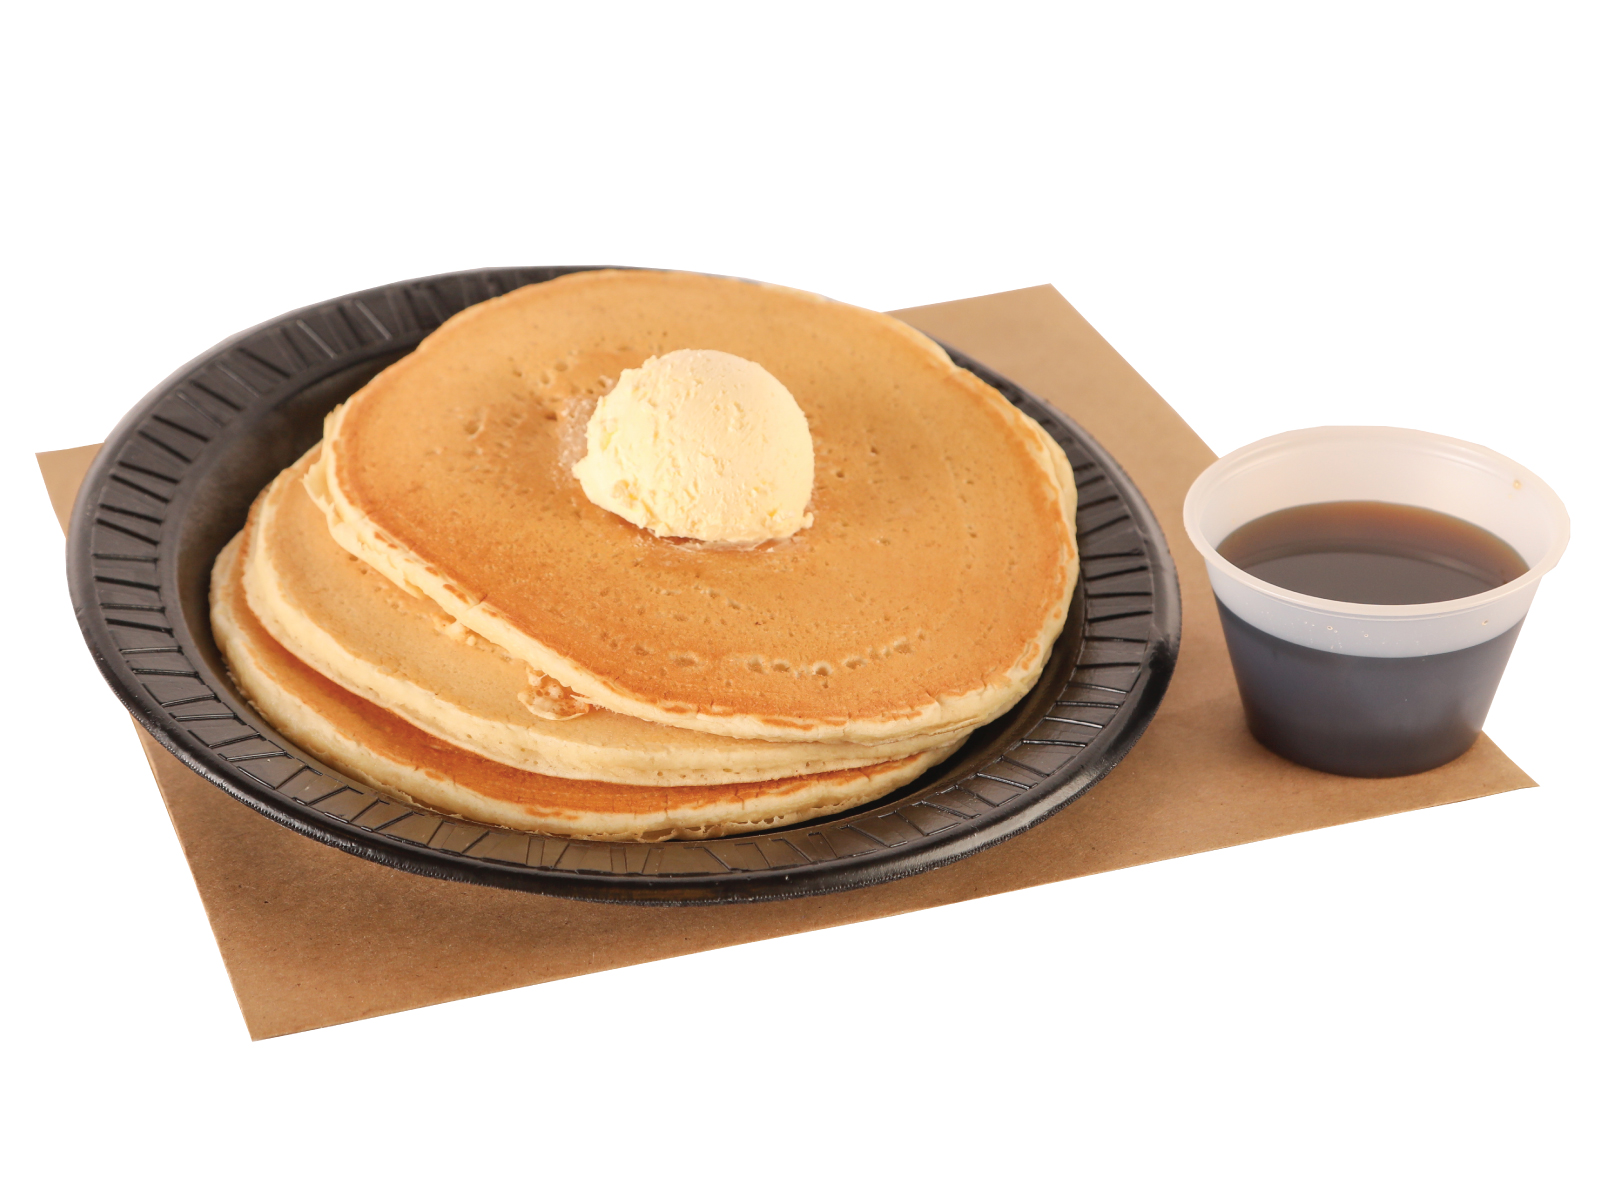 3 griddle cakes with syrup and butter on top on top of brown paper